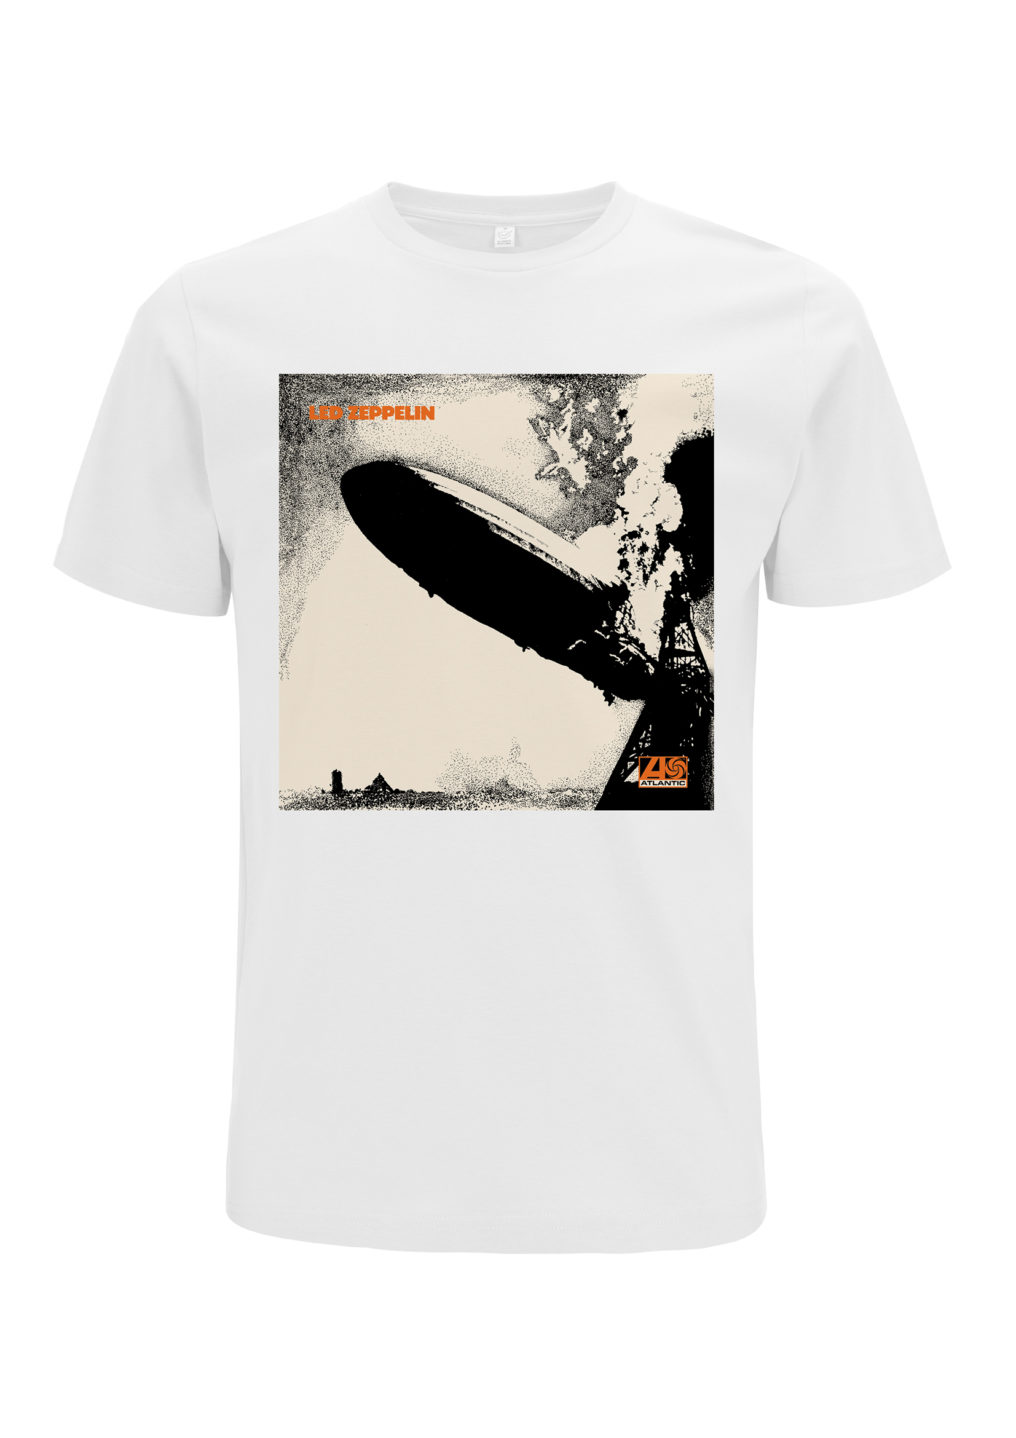 Led Zeppelin 1 Cover White T - Probity Wholesale